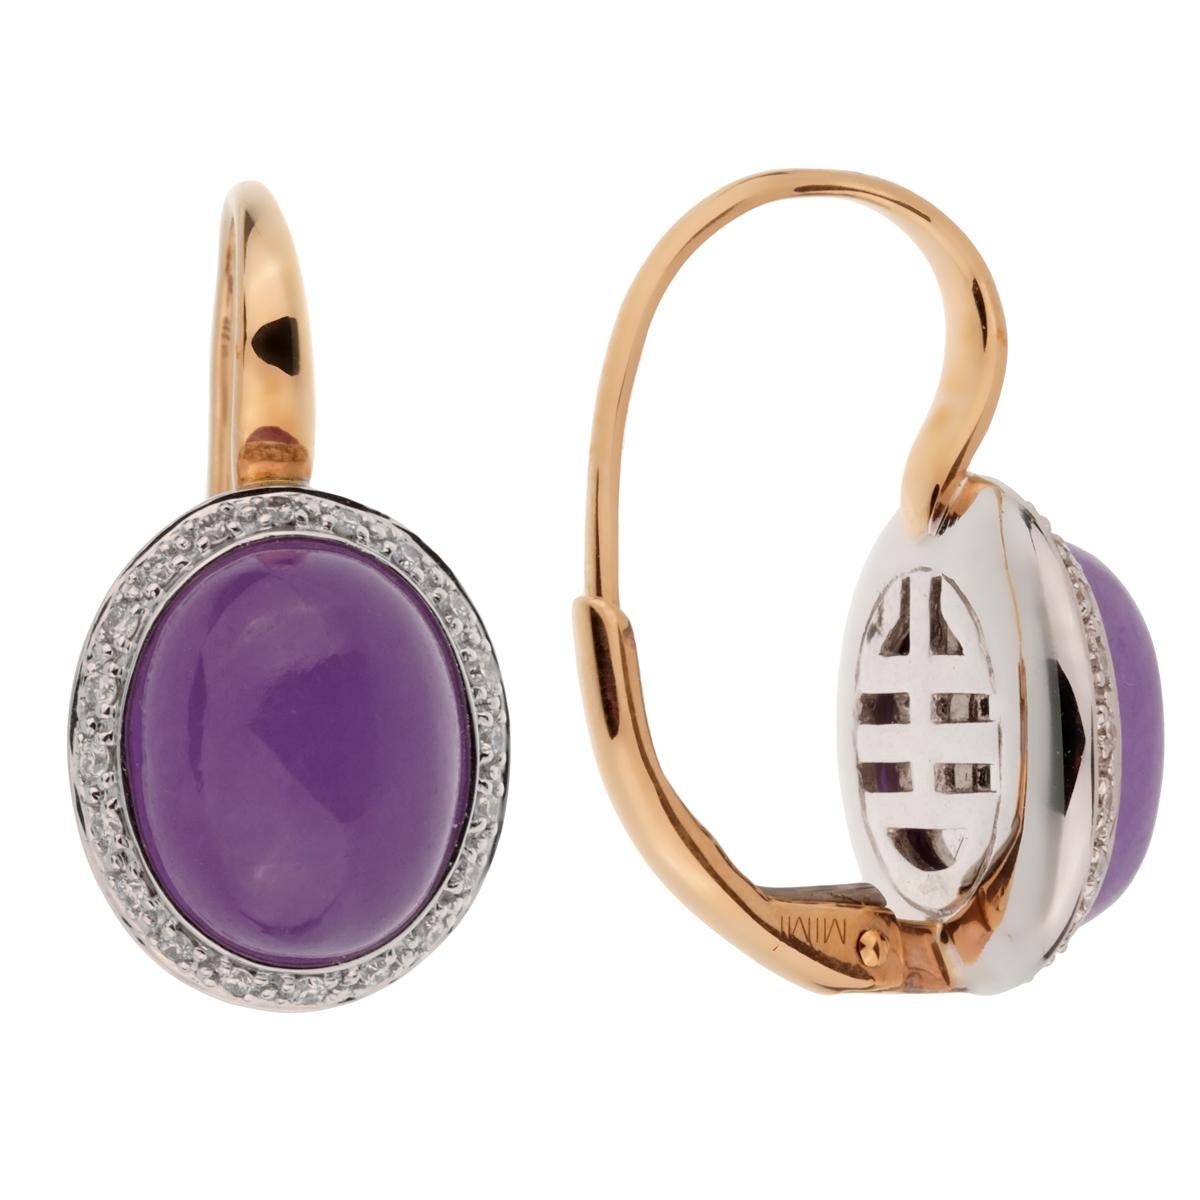 A stunning set of Mimi Milano drop earrings showcasing 8.20ct of Violet Jade encased with .20ct of round brilliant cut diamonds in 18k gold.

Sku: 2494